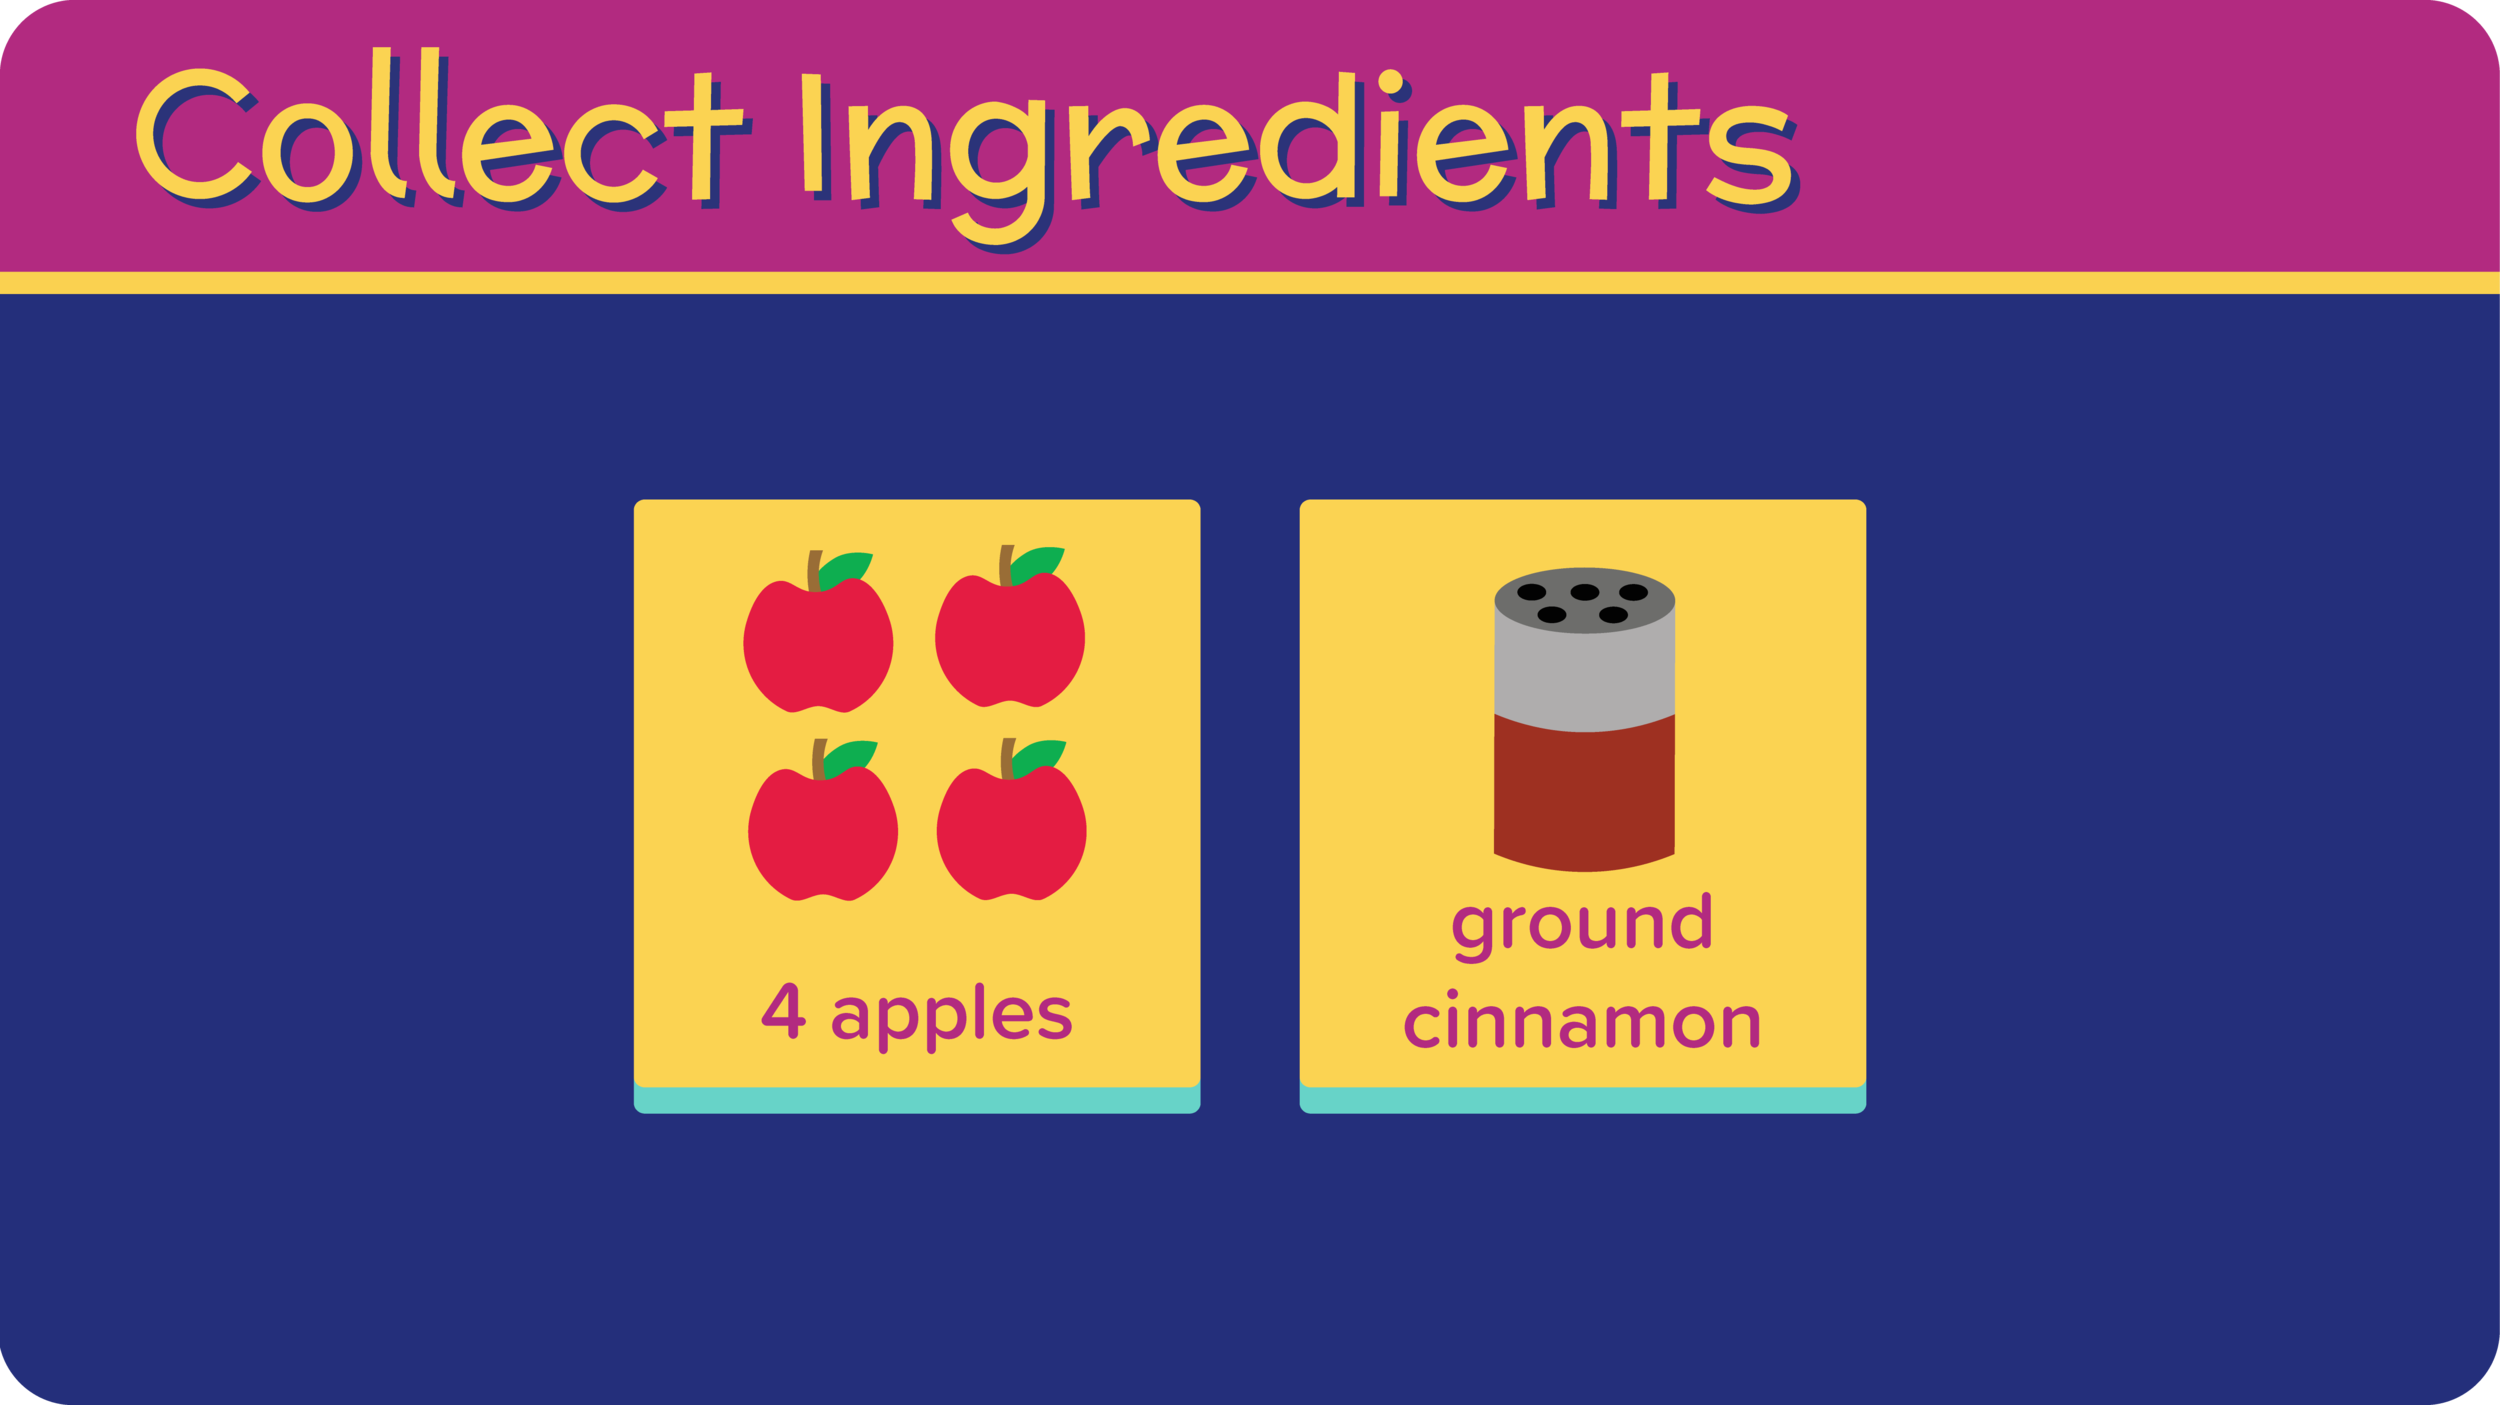 04_AppleSauce_Collect Ingredients-01.png